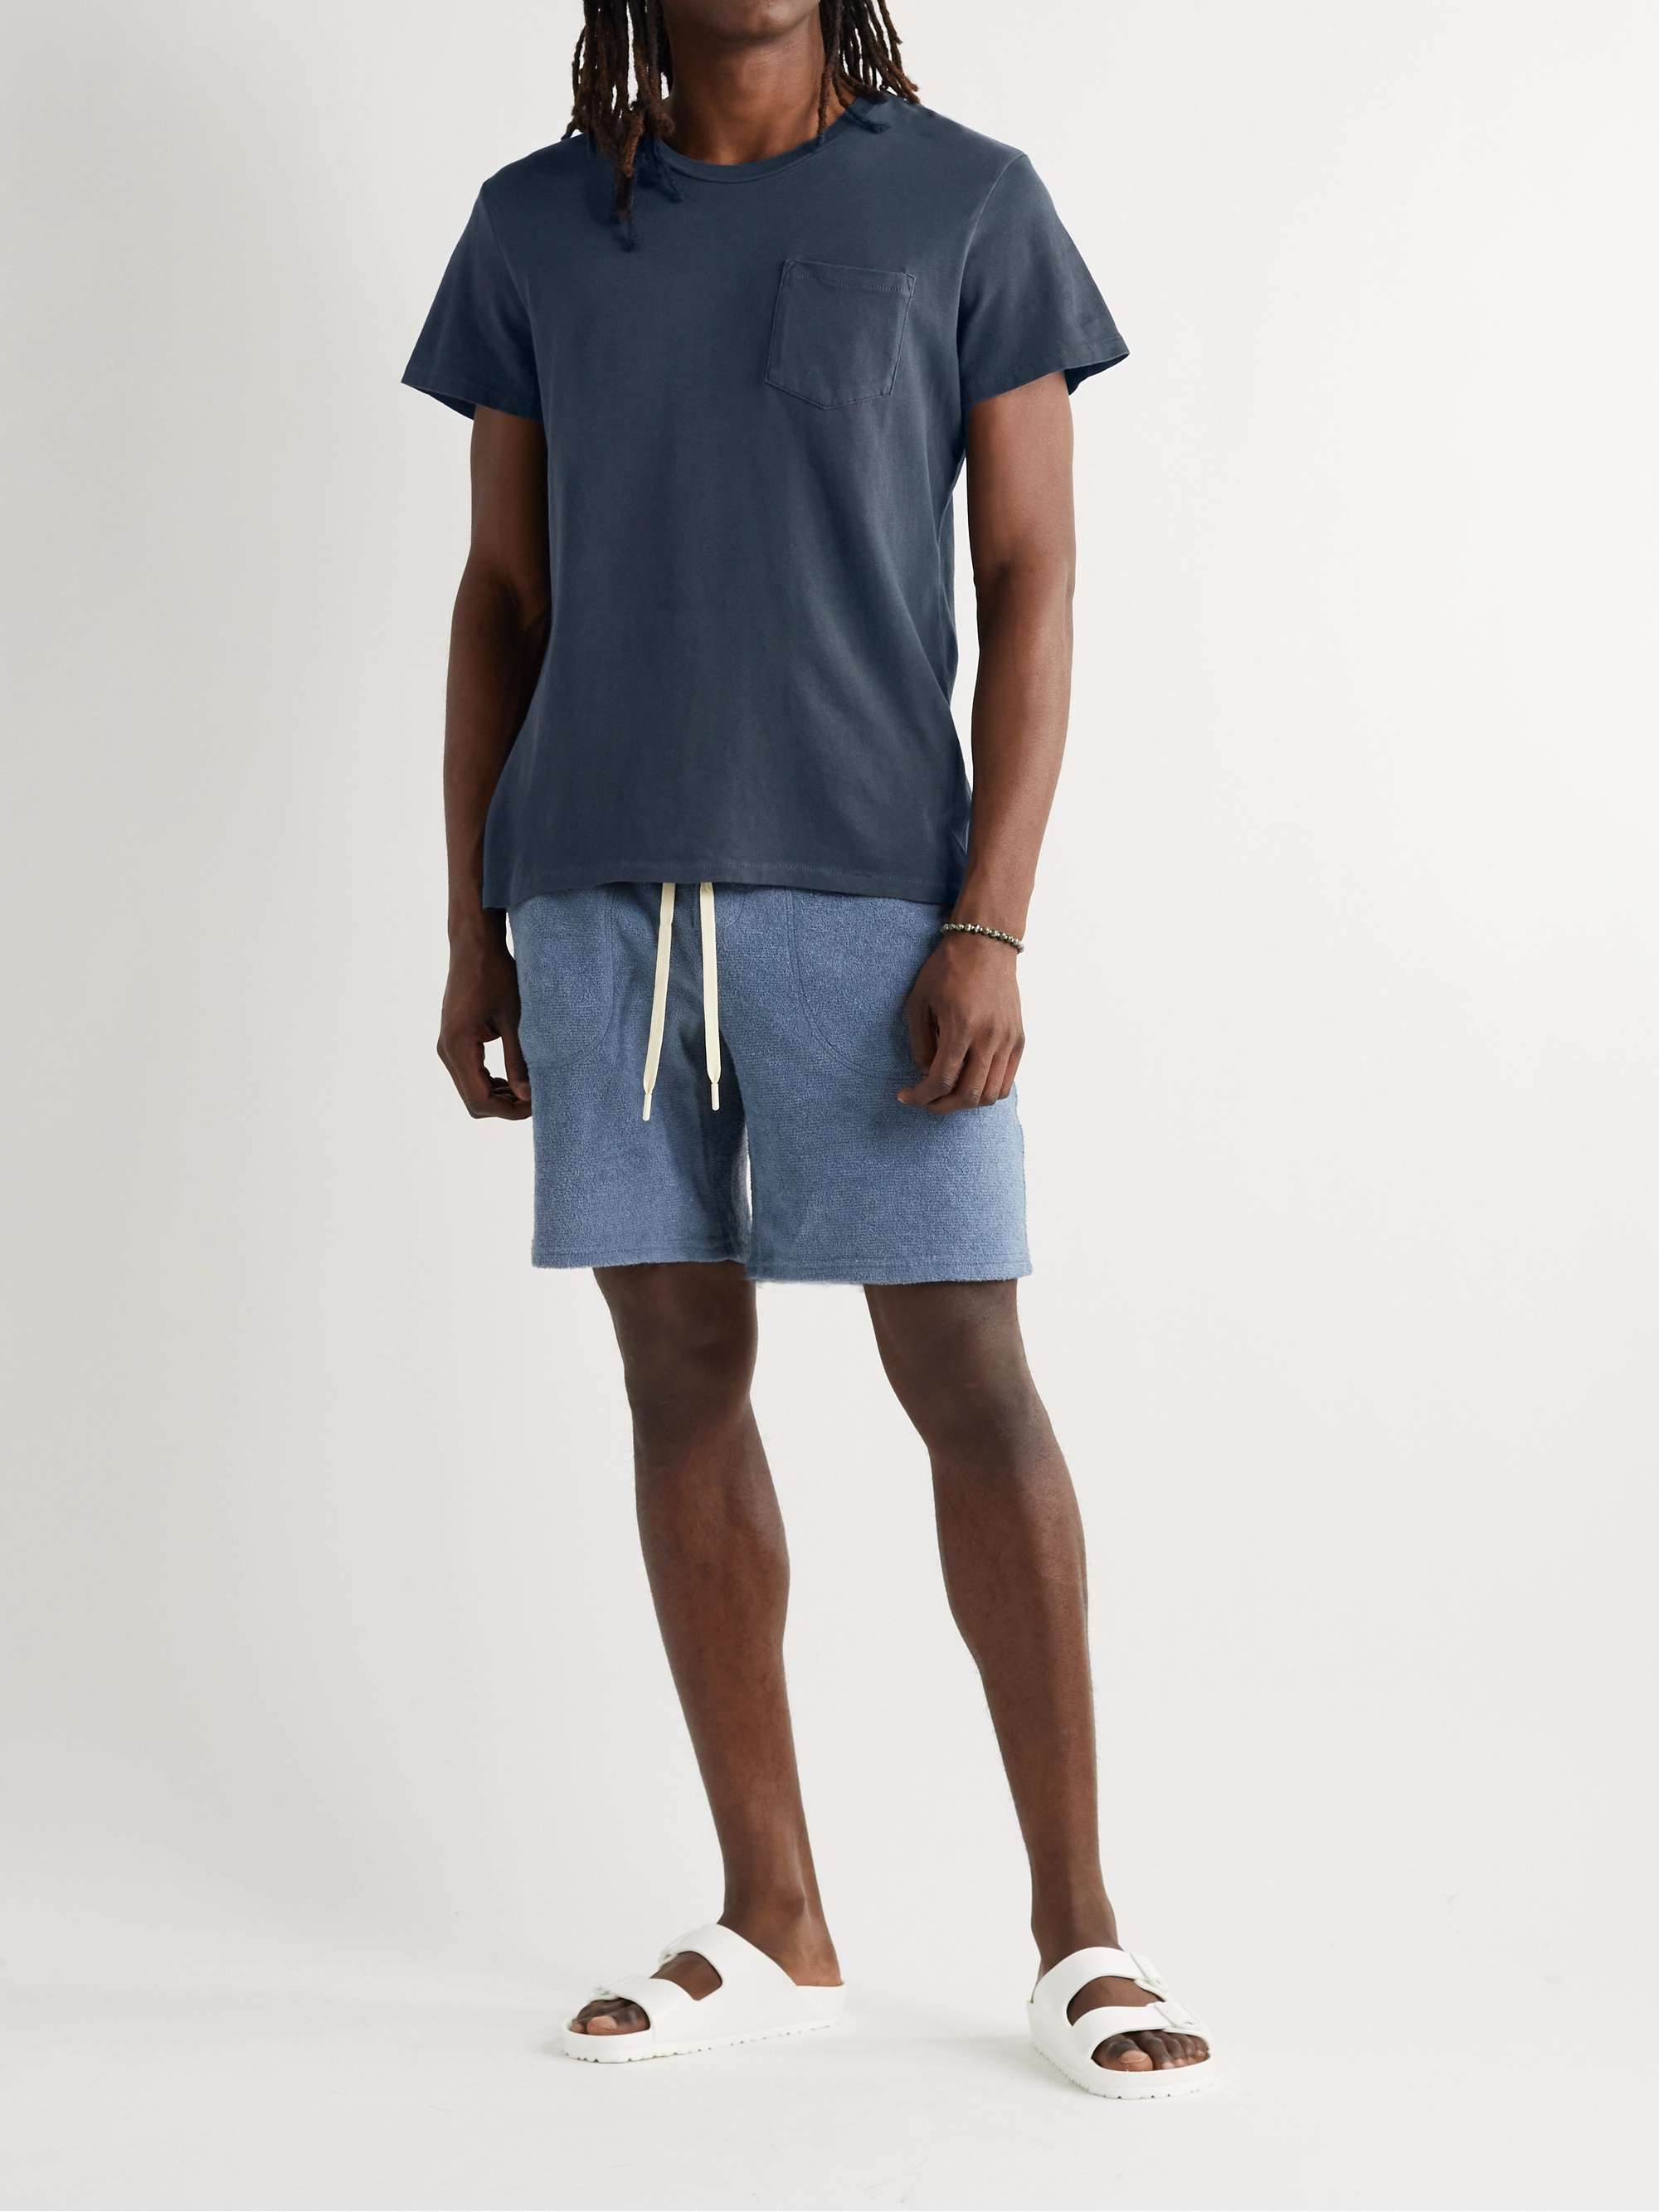 Navy Groovy Organic Cotton-Jersey T-Shirt | OUTERKNOWN | MR PORTER